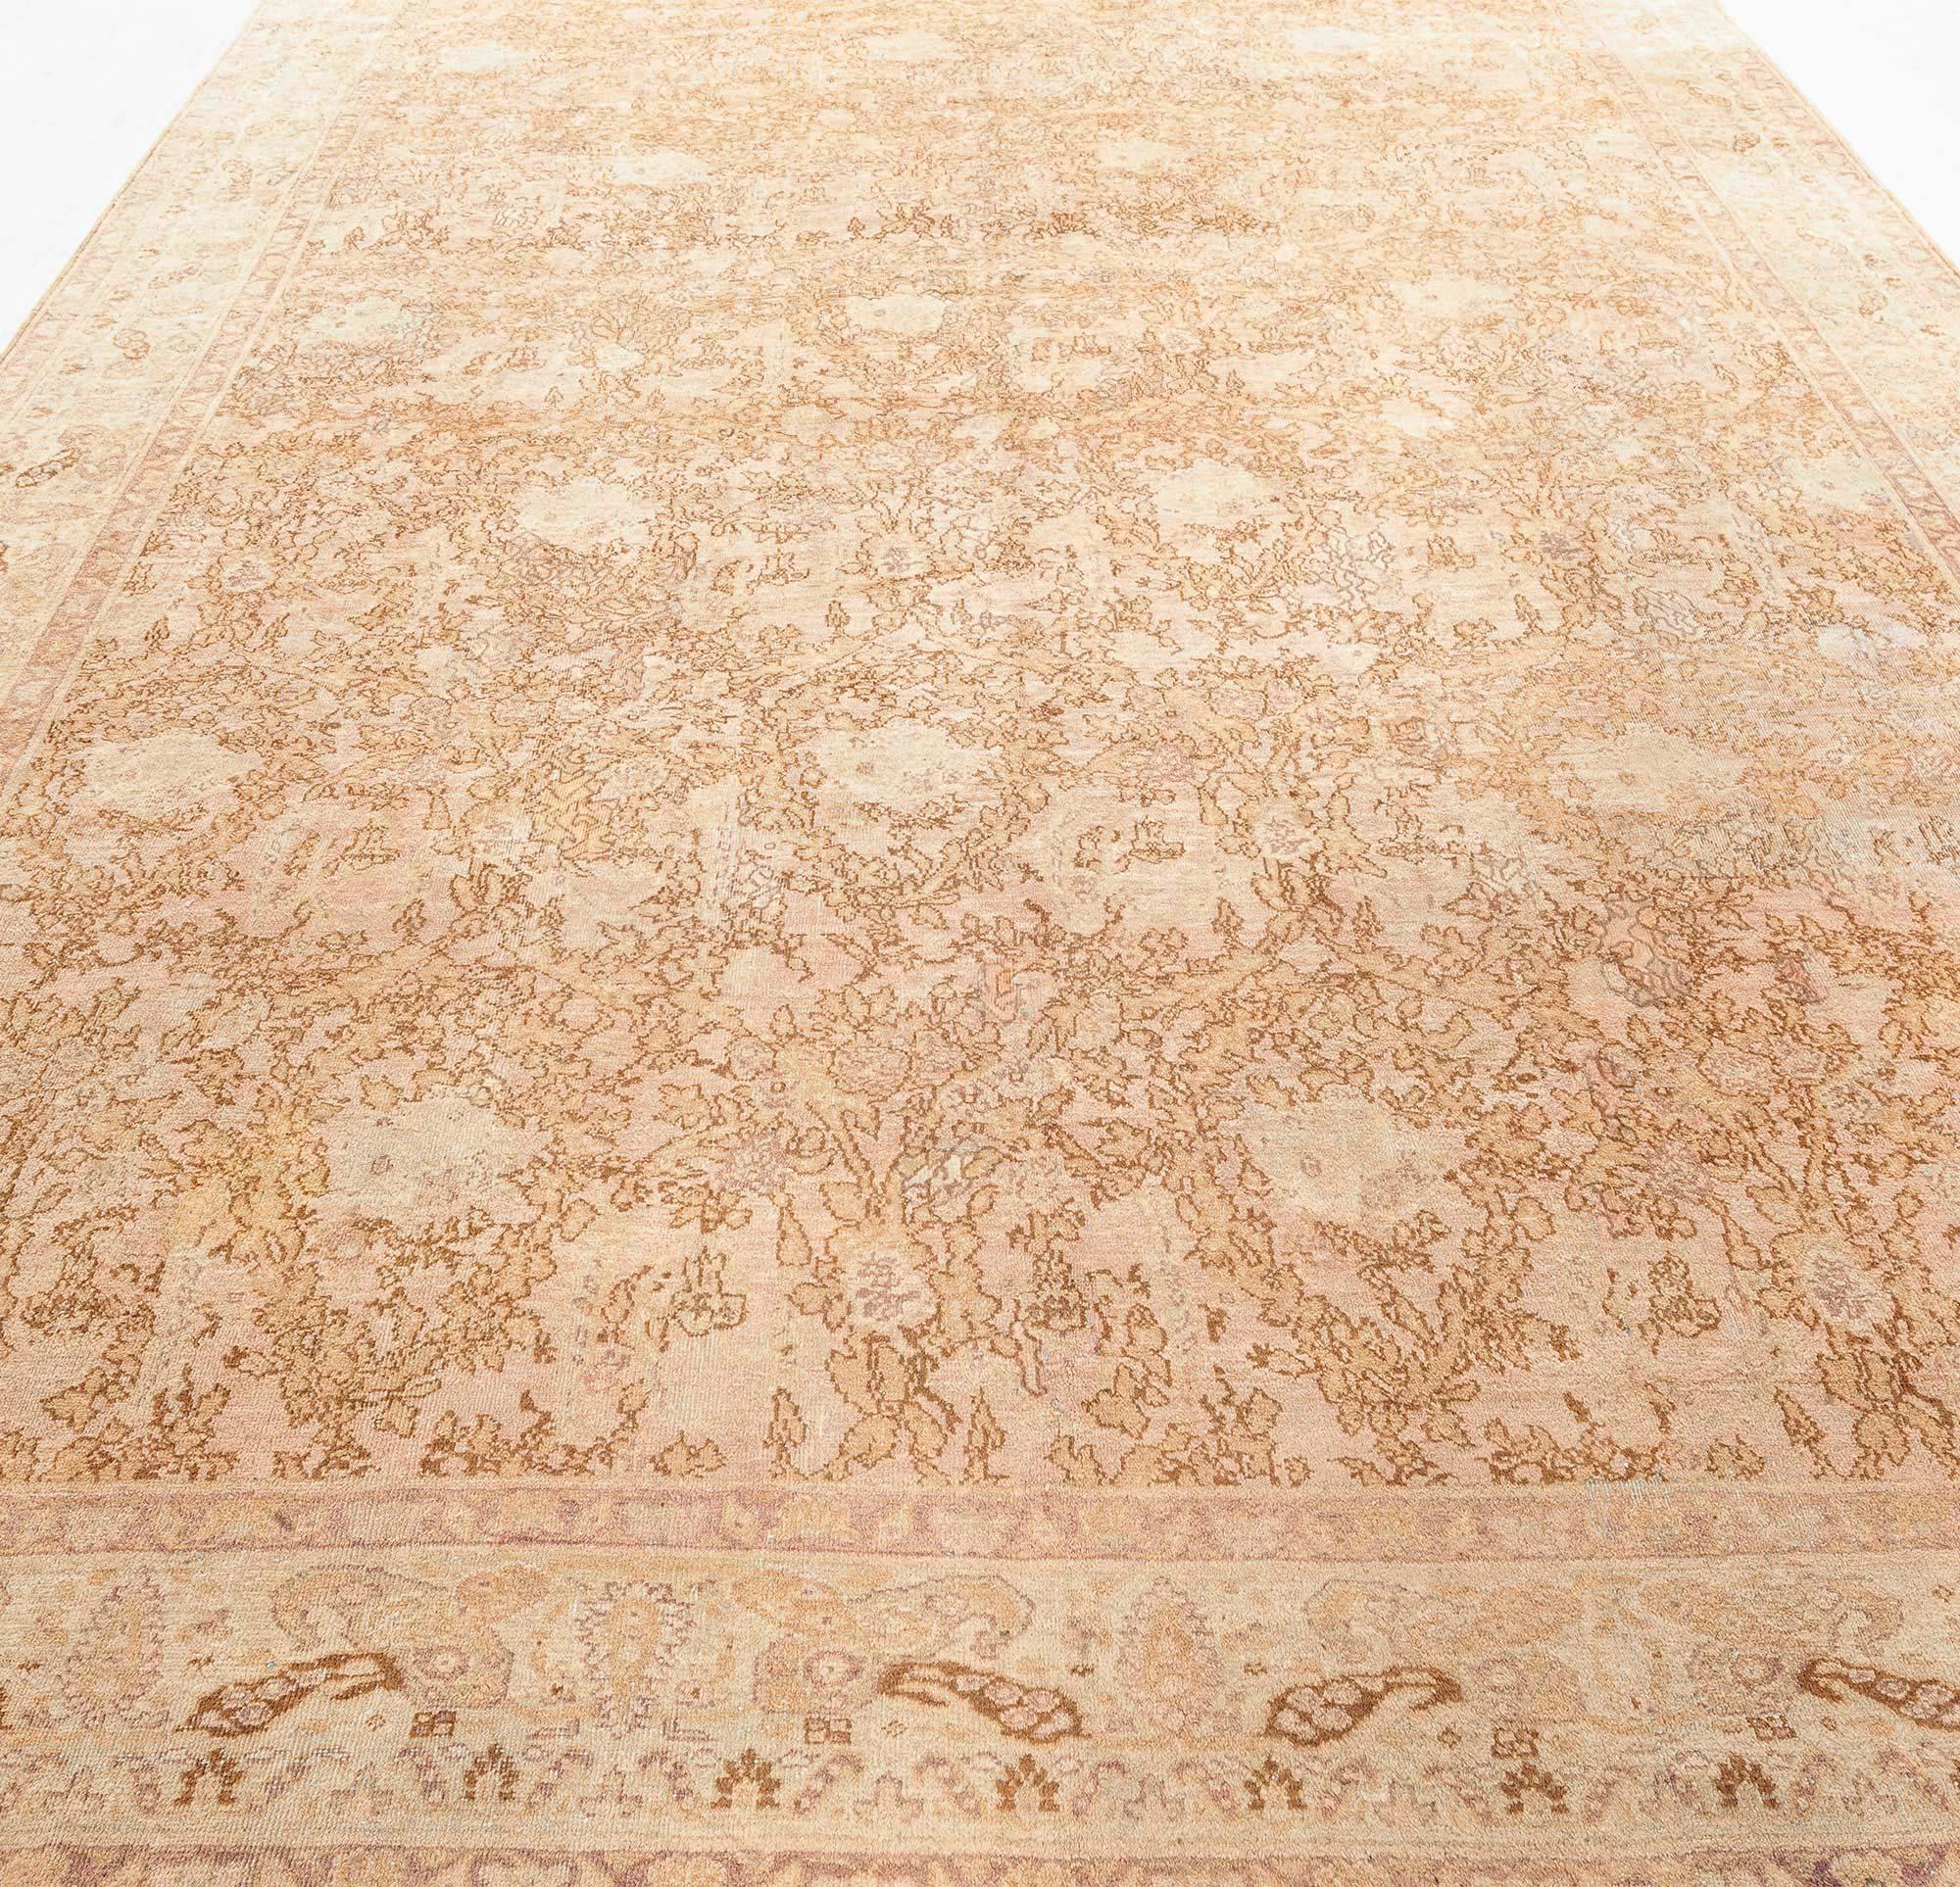 Authentic antique Indian Amritsar rug
Size: 9'8